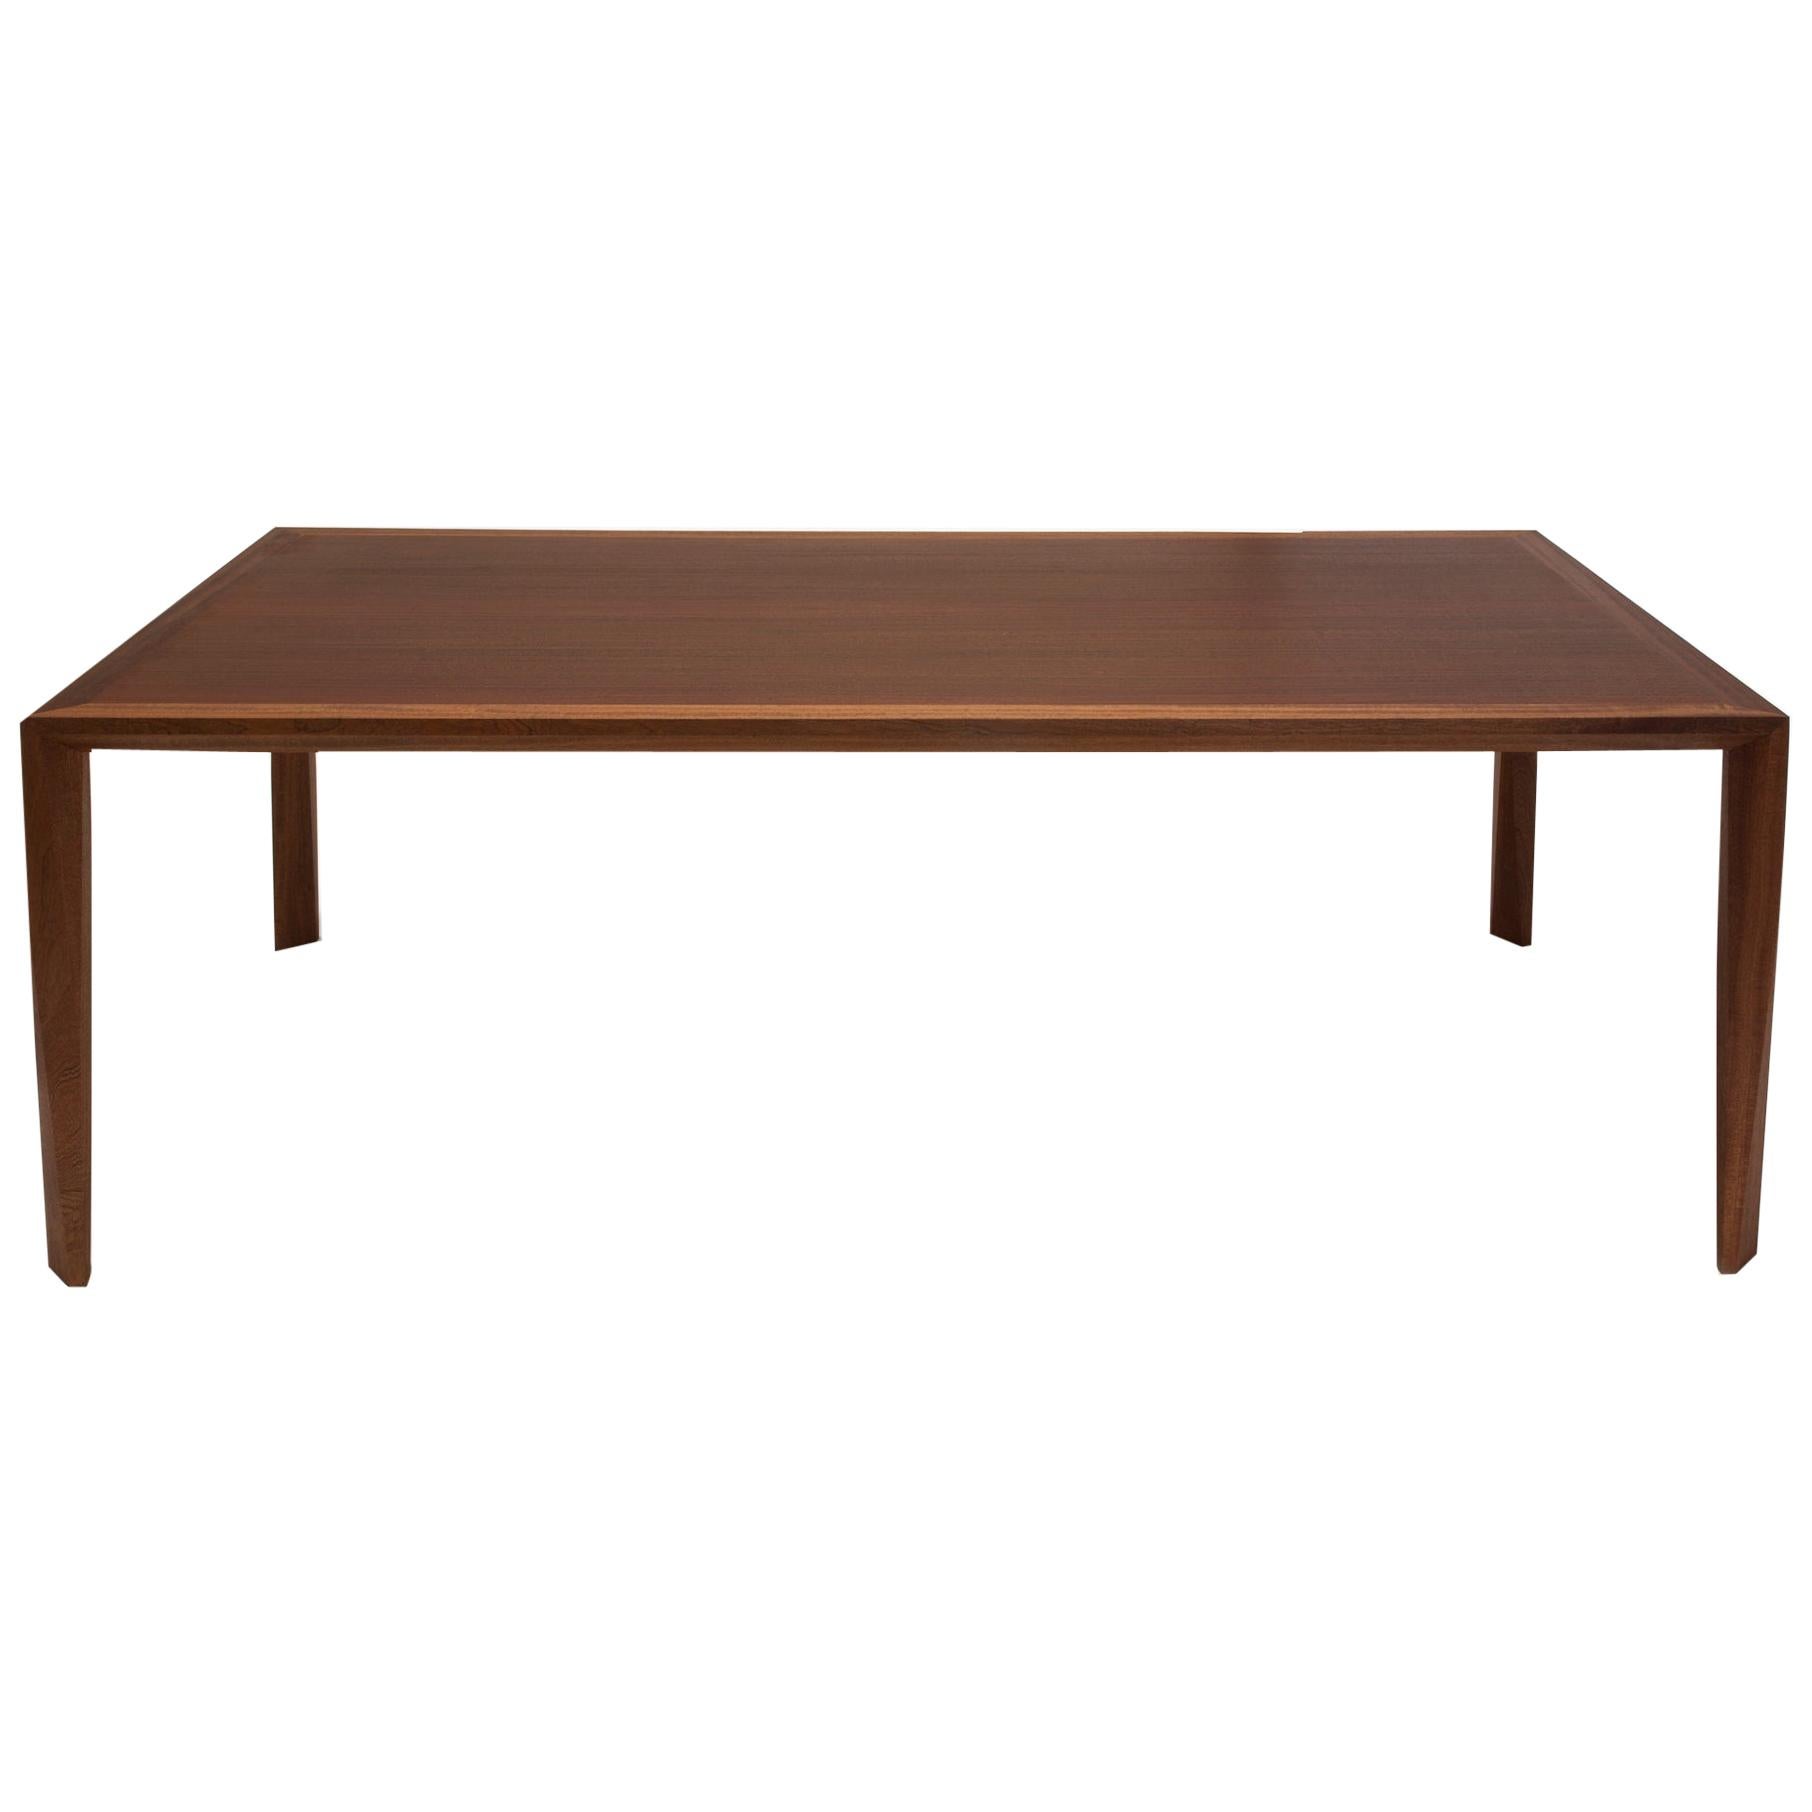 This version of our new dining table/console table series is called the 